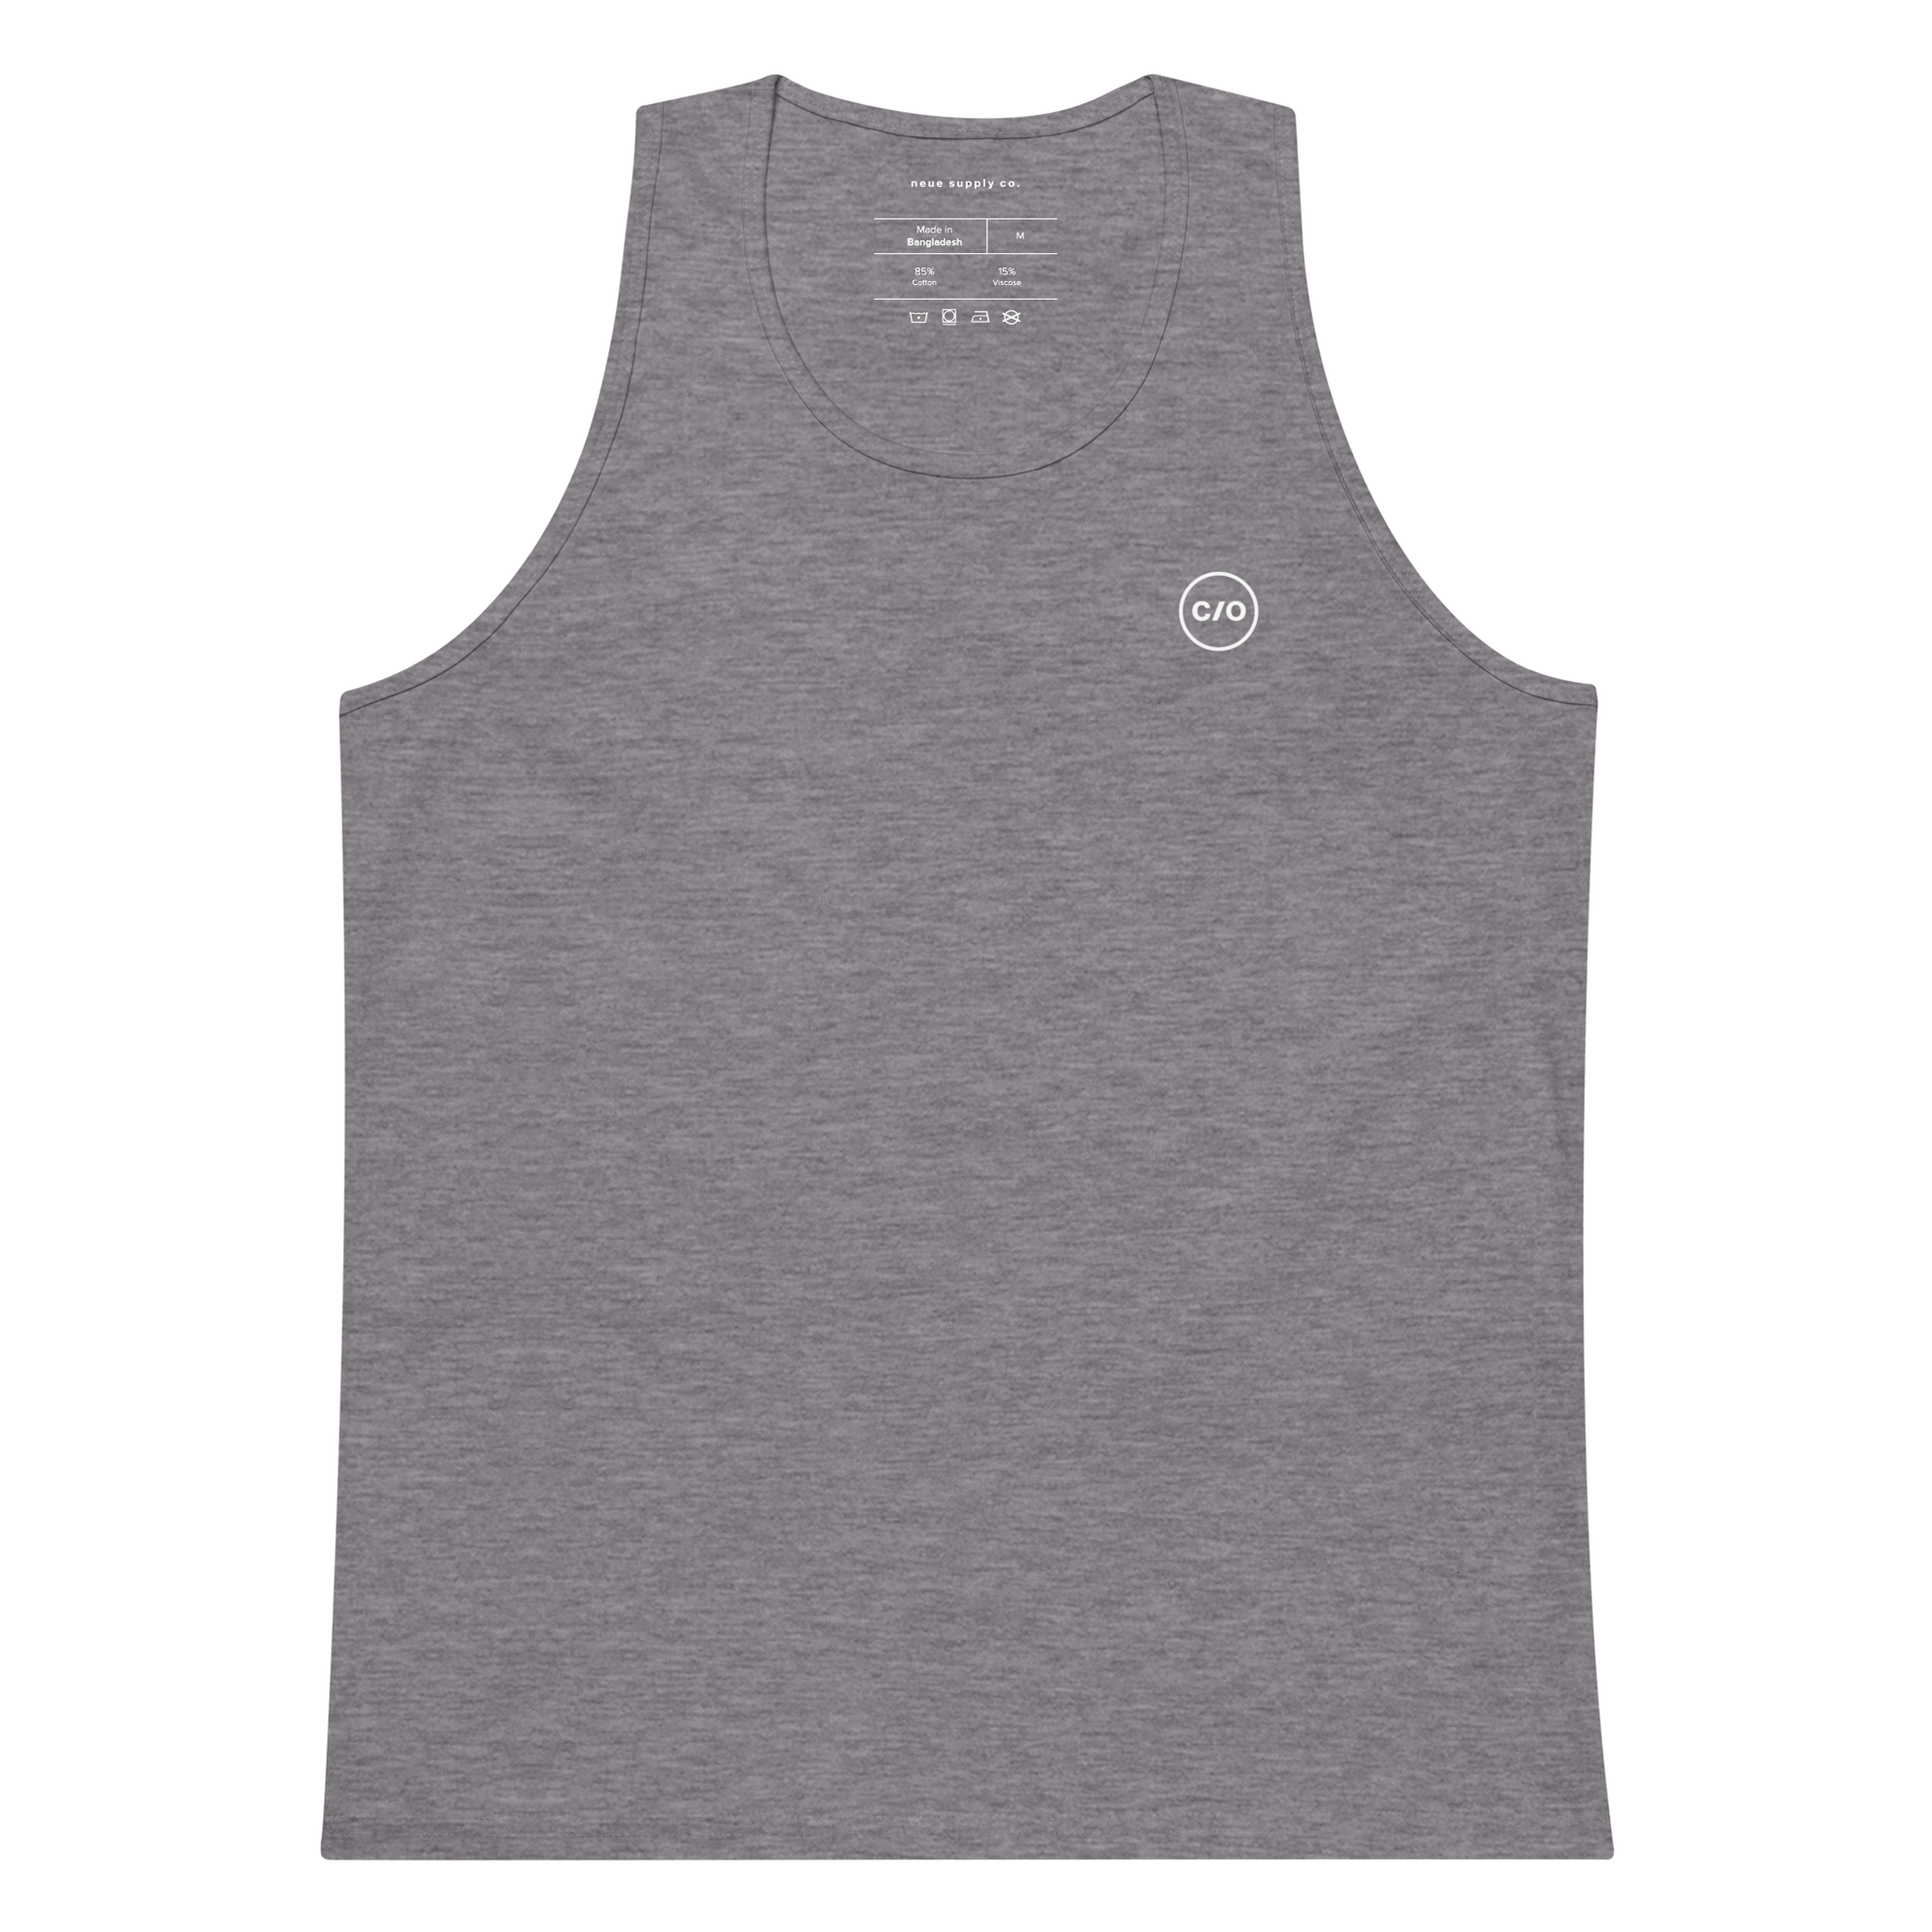 Neue Supply Co. Essential Workout Tank Top for Men in Athletic Heather Gray flat view